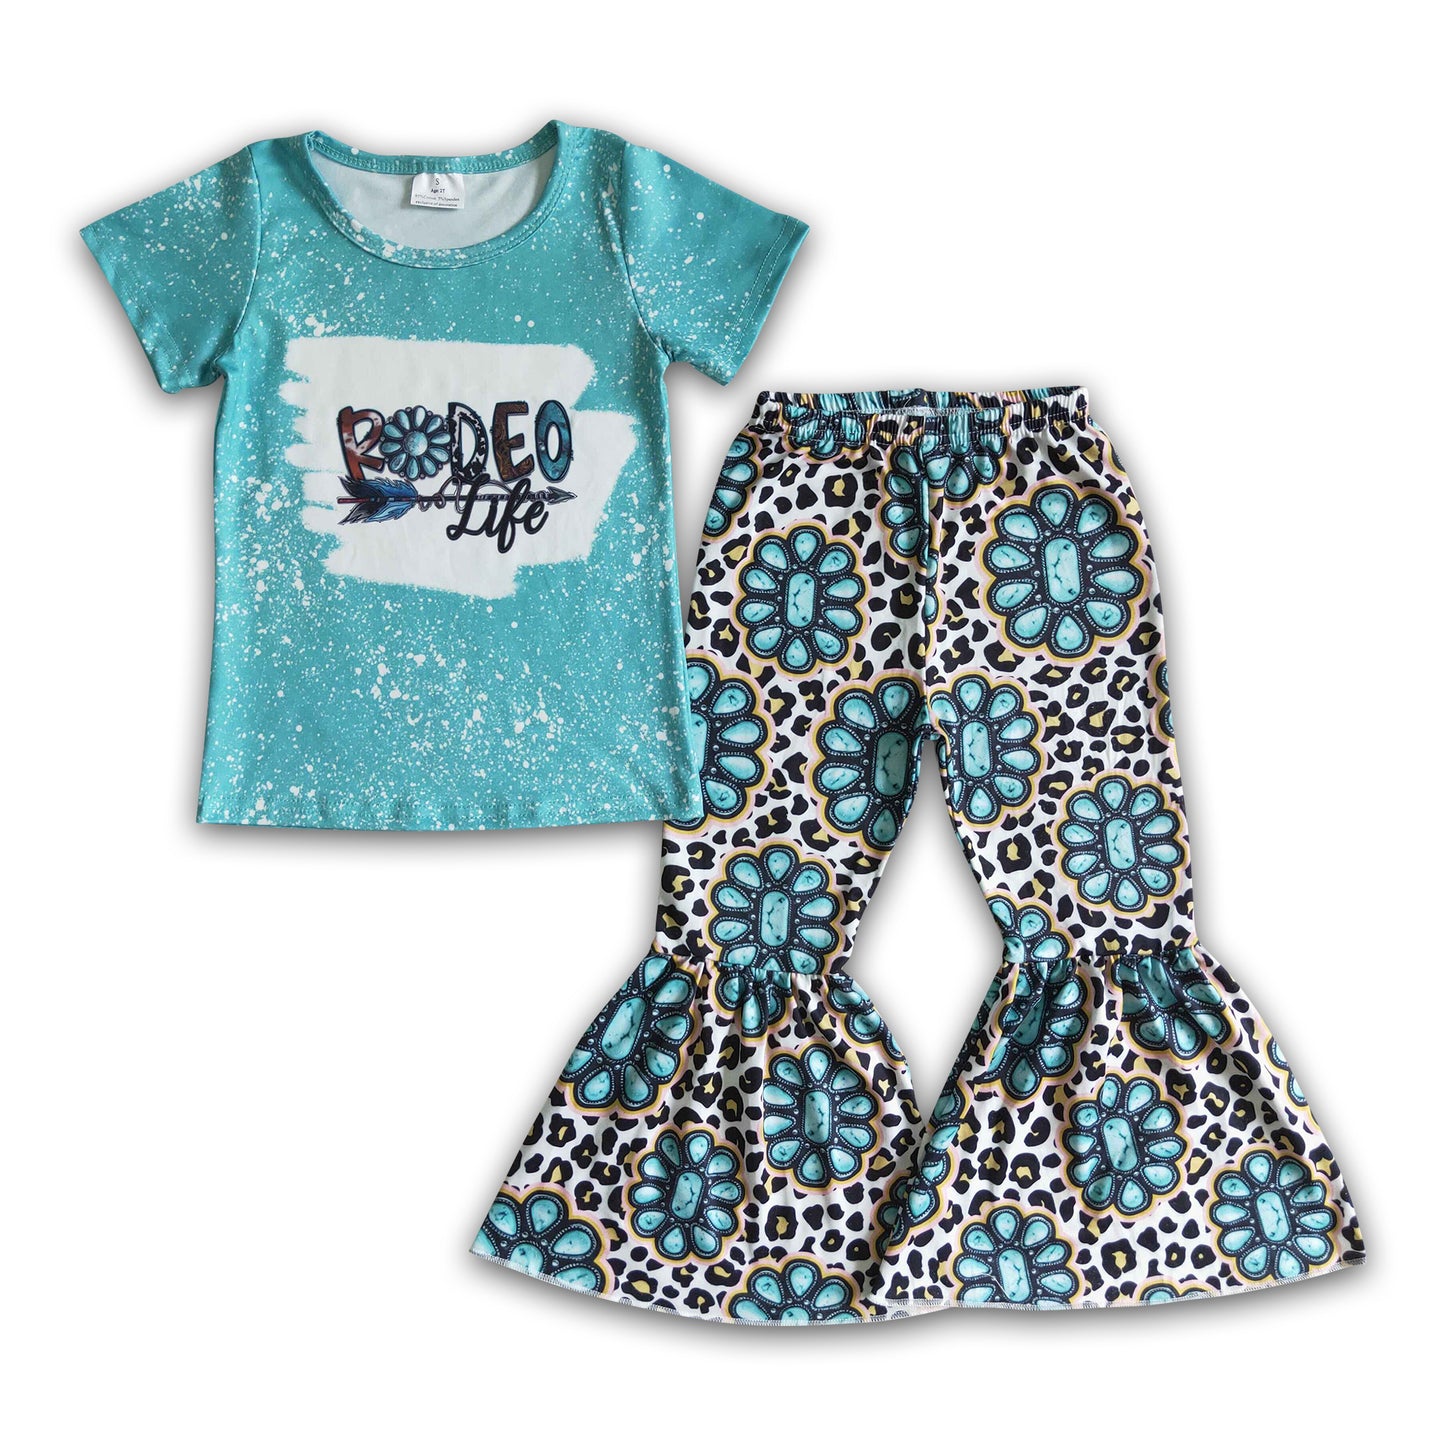 Rodeo turquoise leopard kids girls western outfits